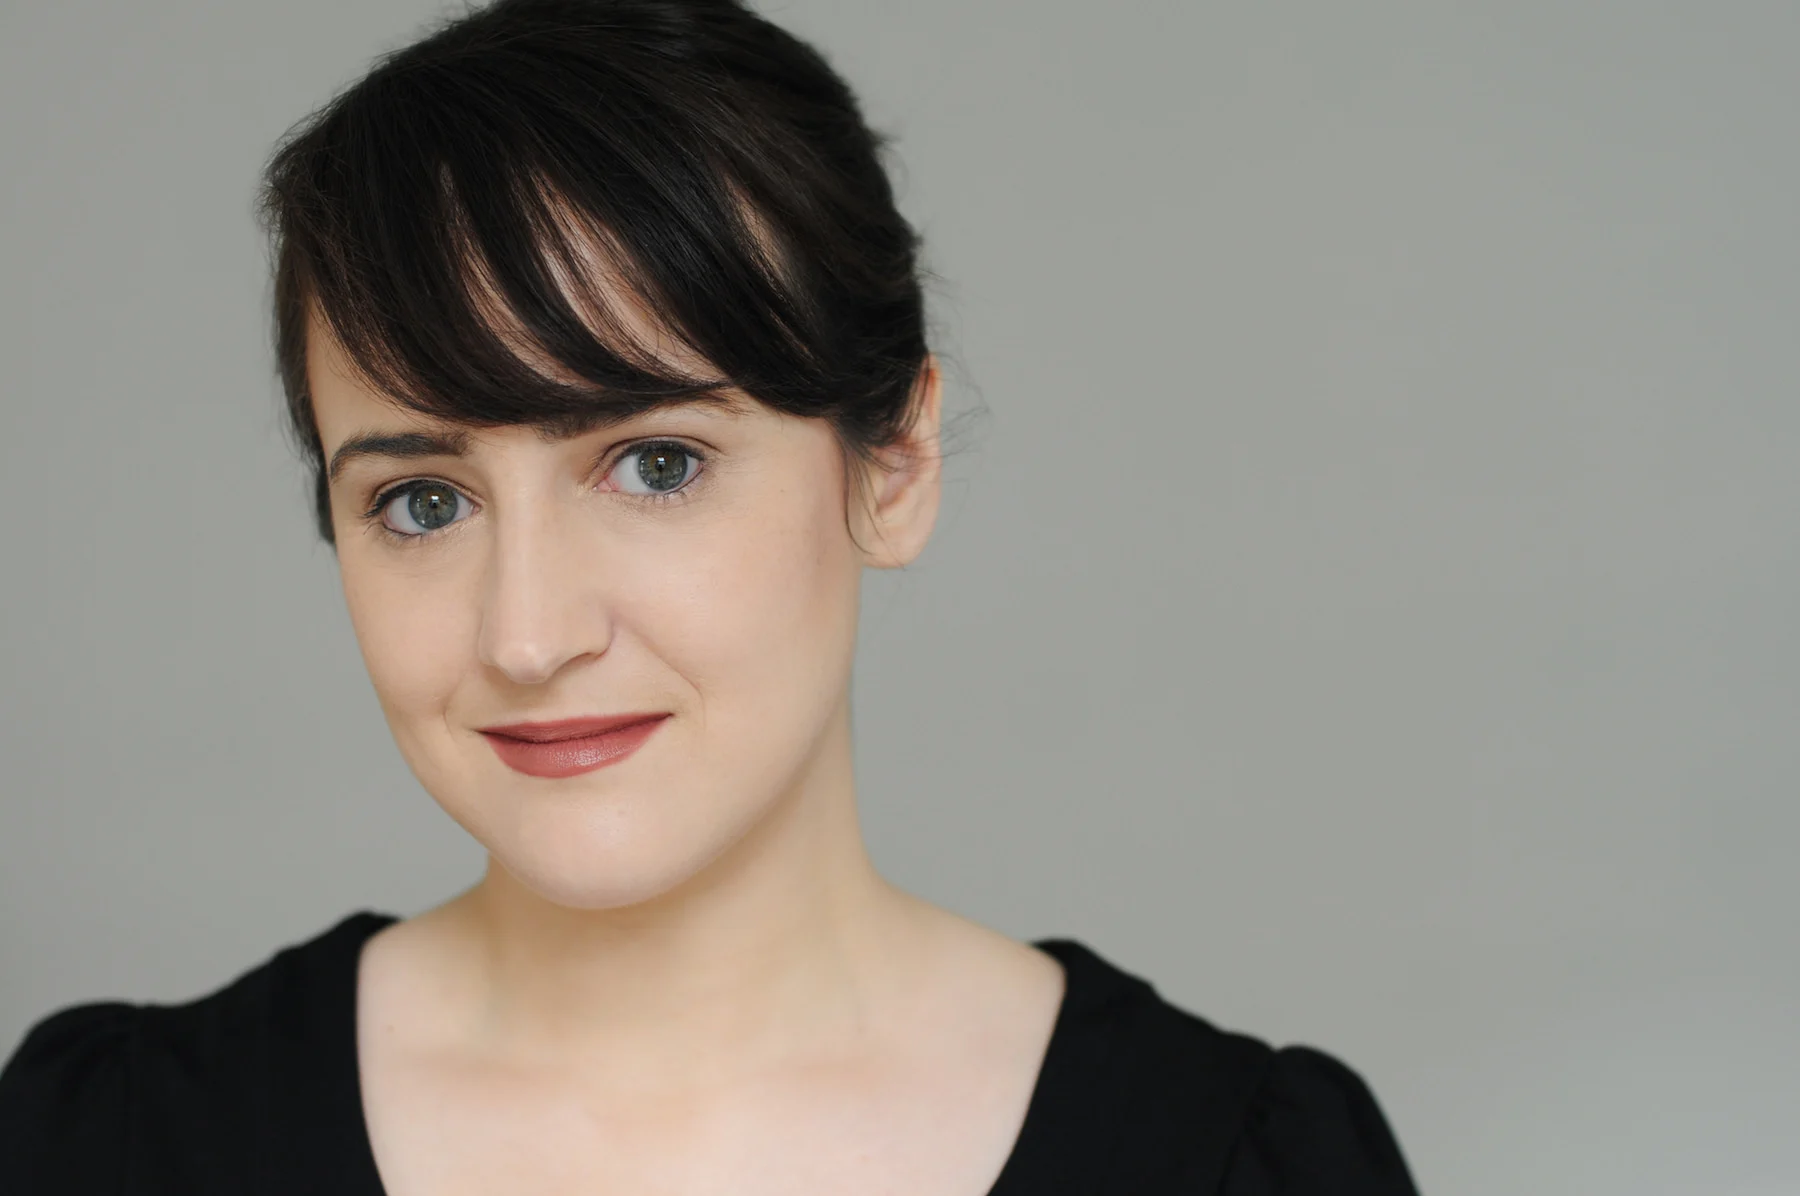 Mara Wilson: If You Have One Idea, You Have More